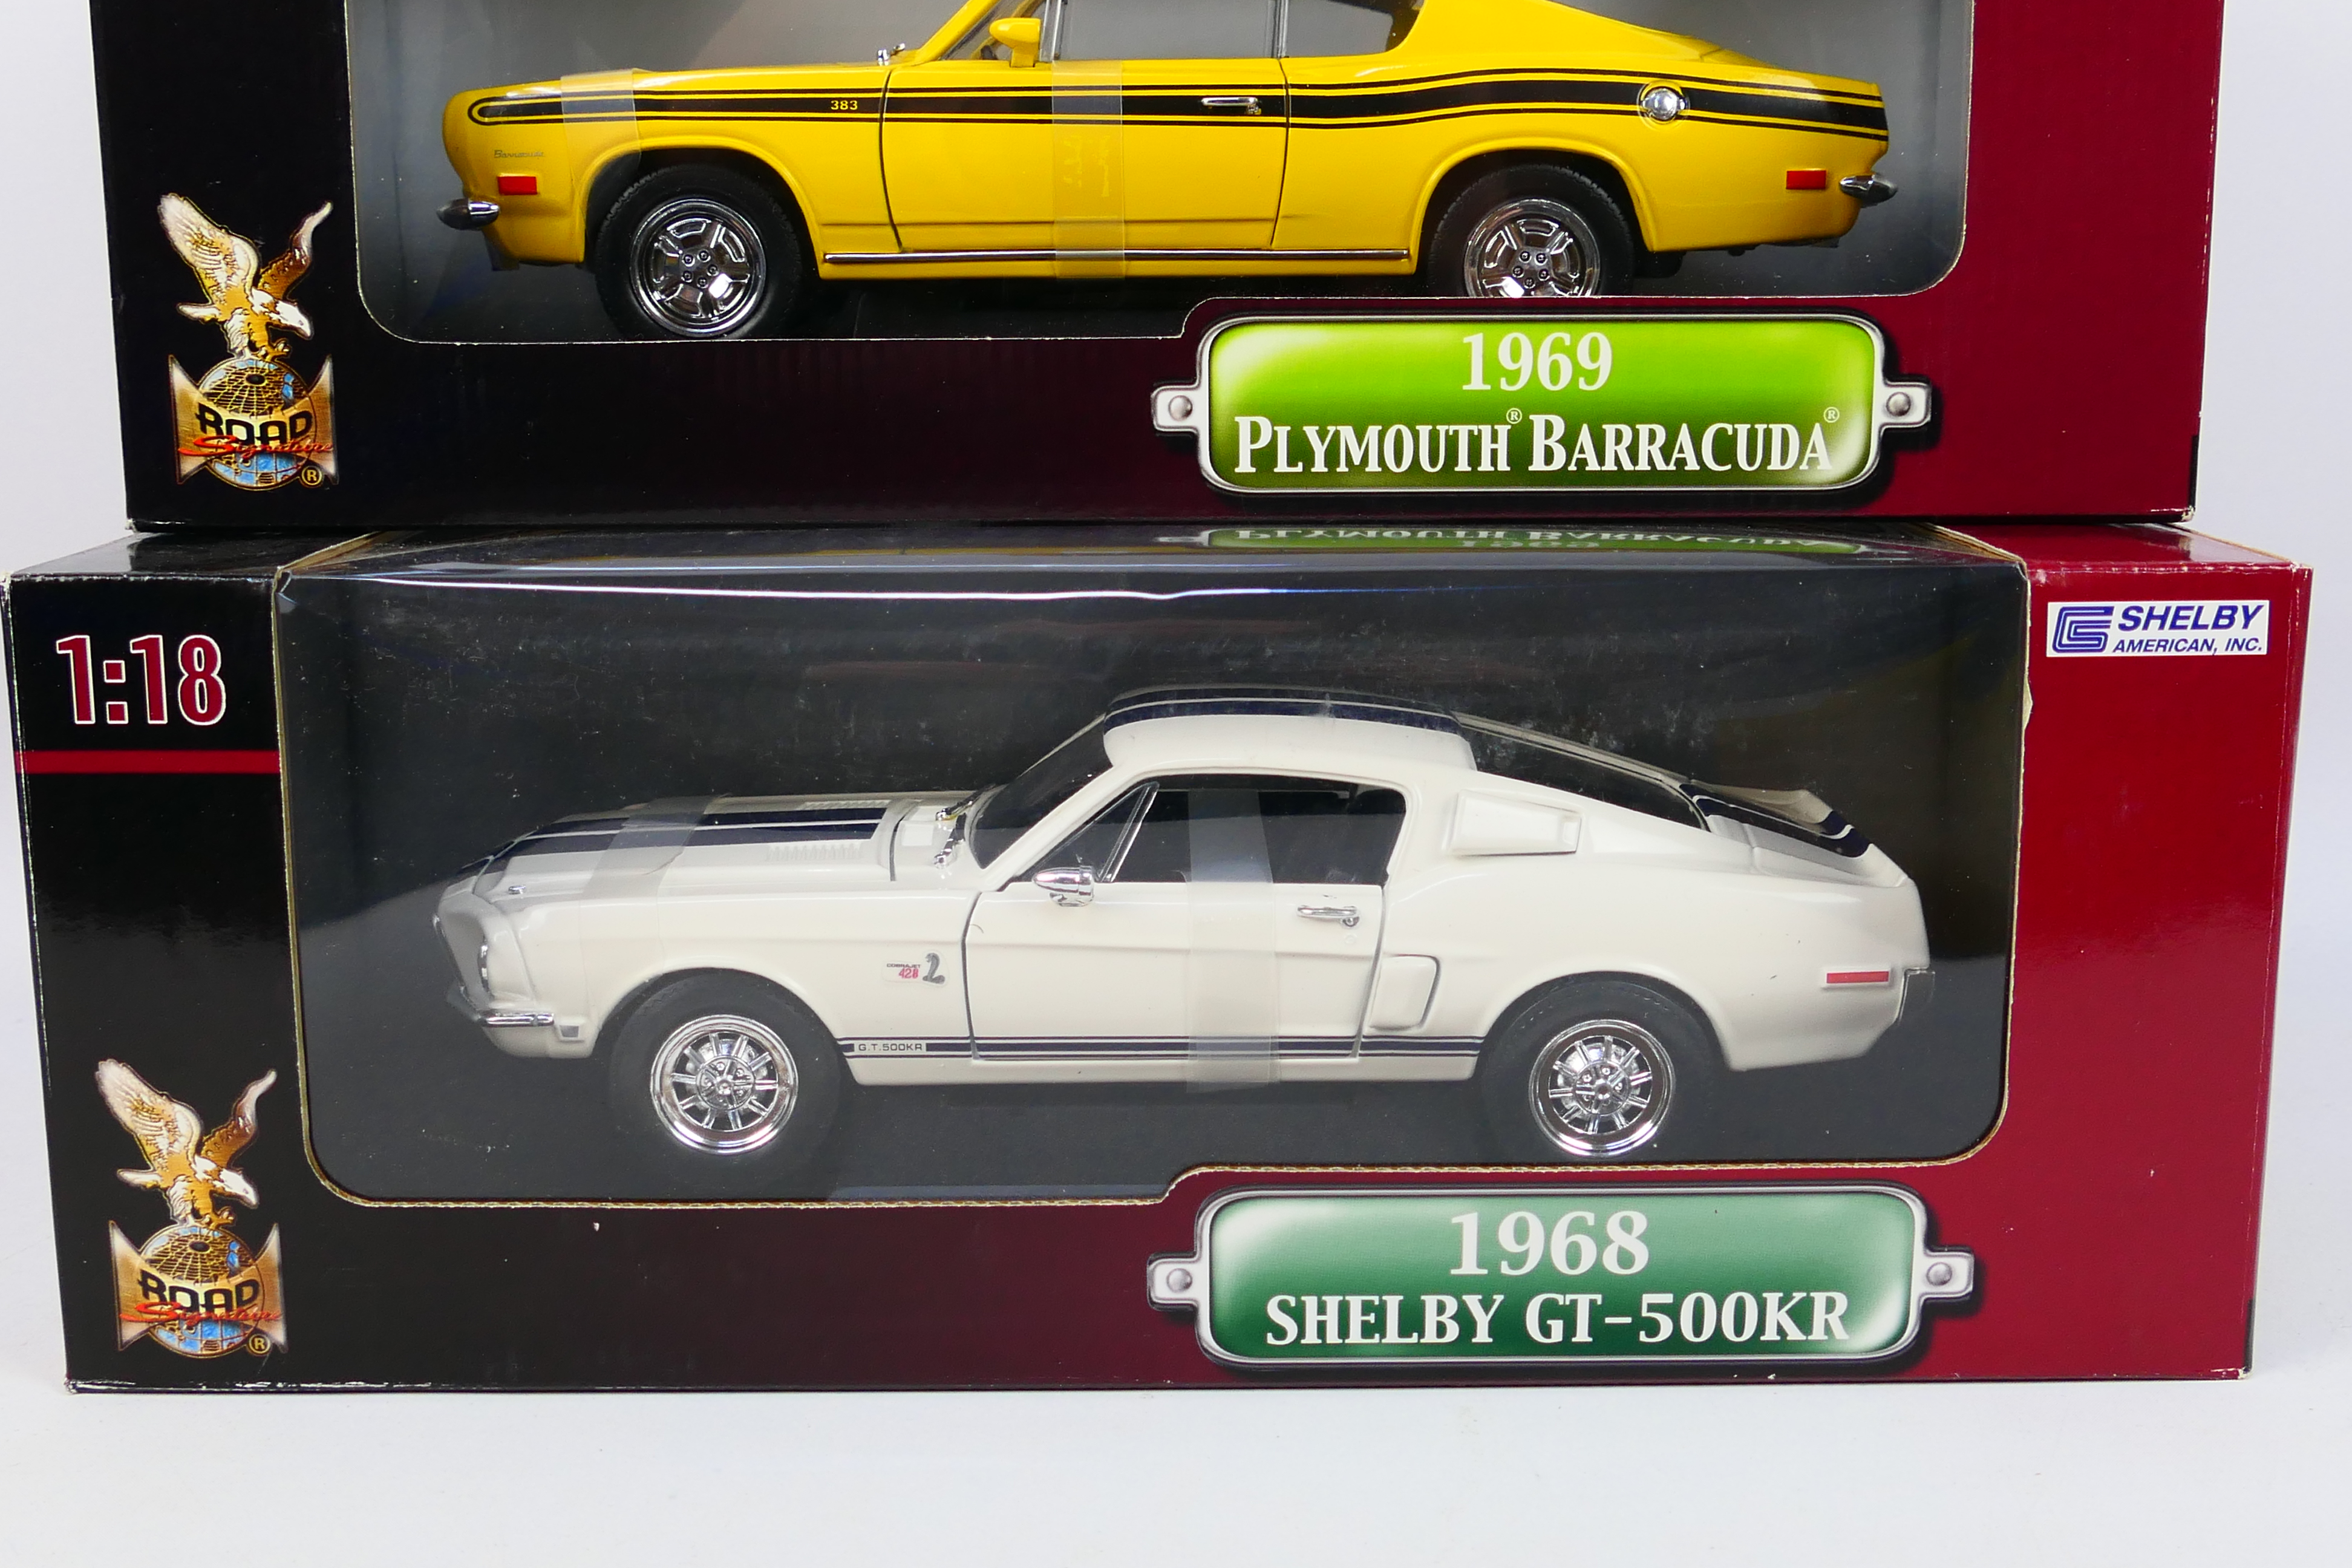 Road Signature - Two boxed diecast 1:18 scale model cars from Road Signature 'Deluxe Edition' range. - Image 2 of 3